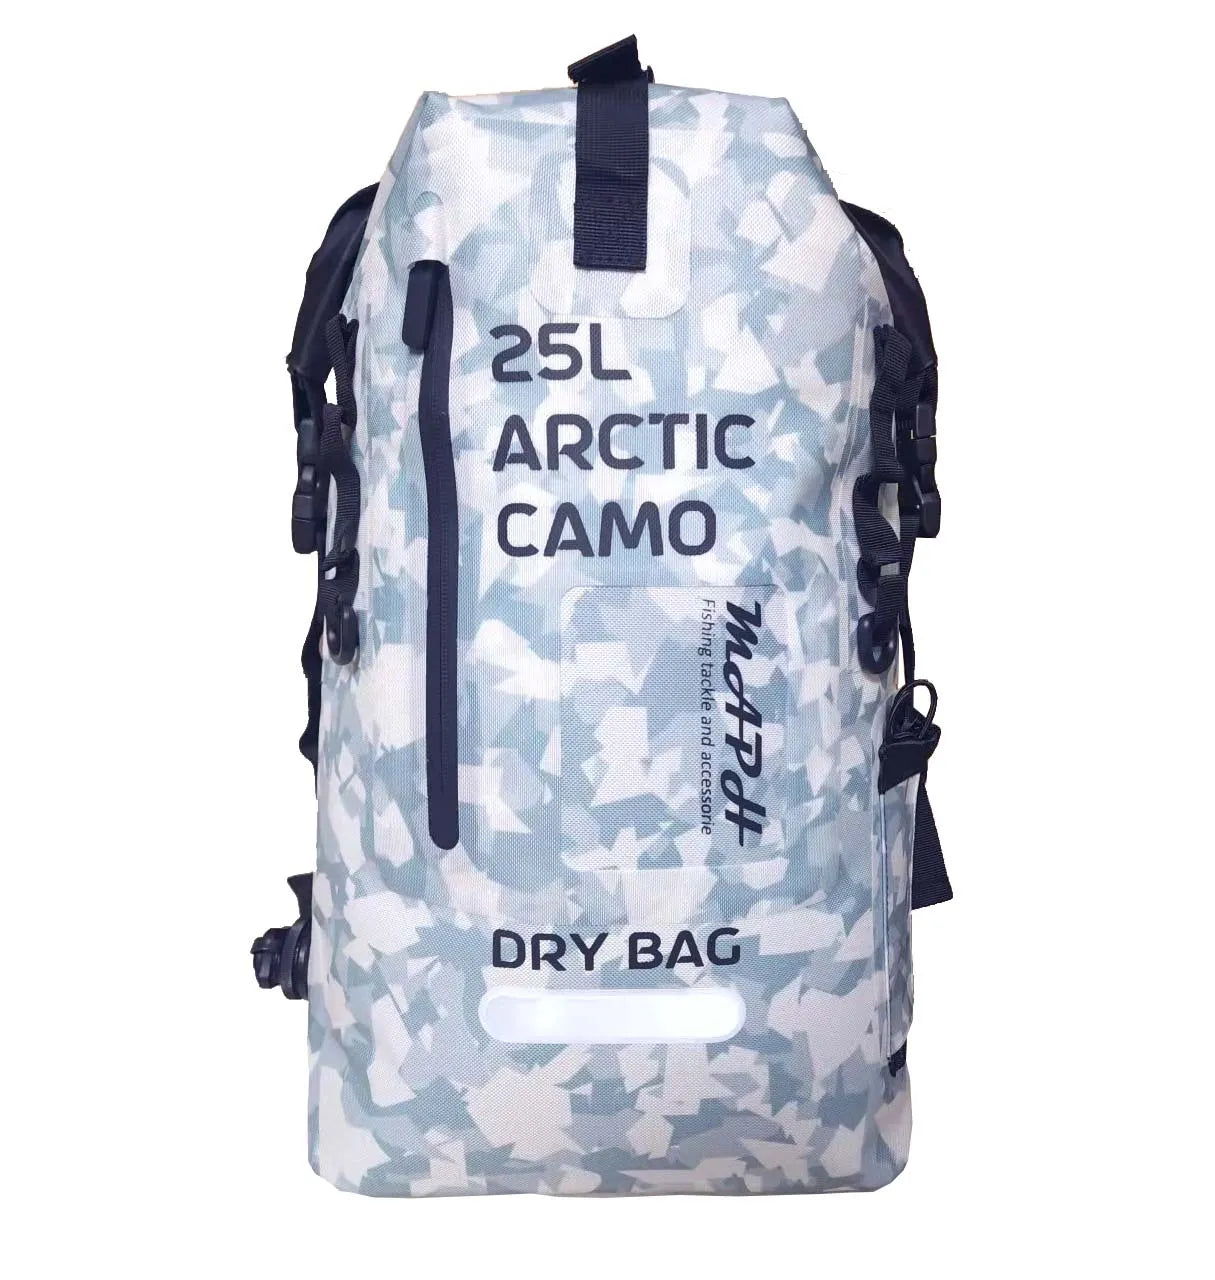 Maph Drybag Backpack 25L Artic Camo - Compleat Angler Nedlands Pro Tackle